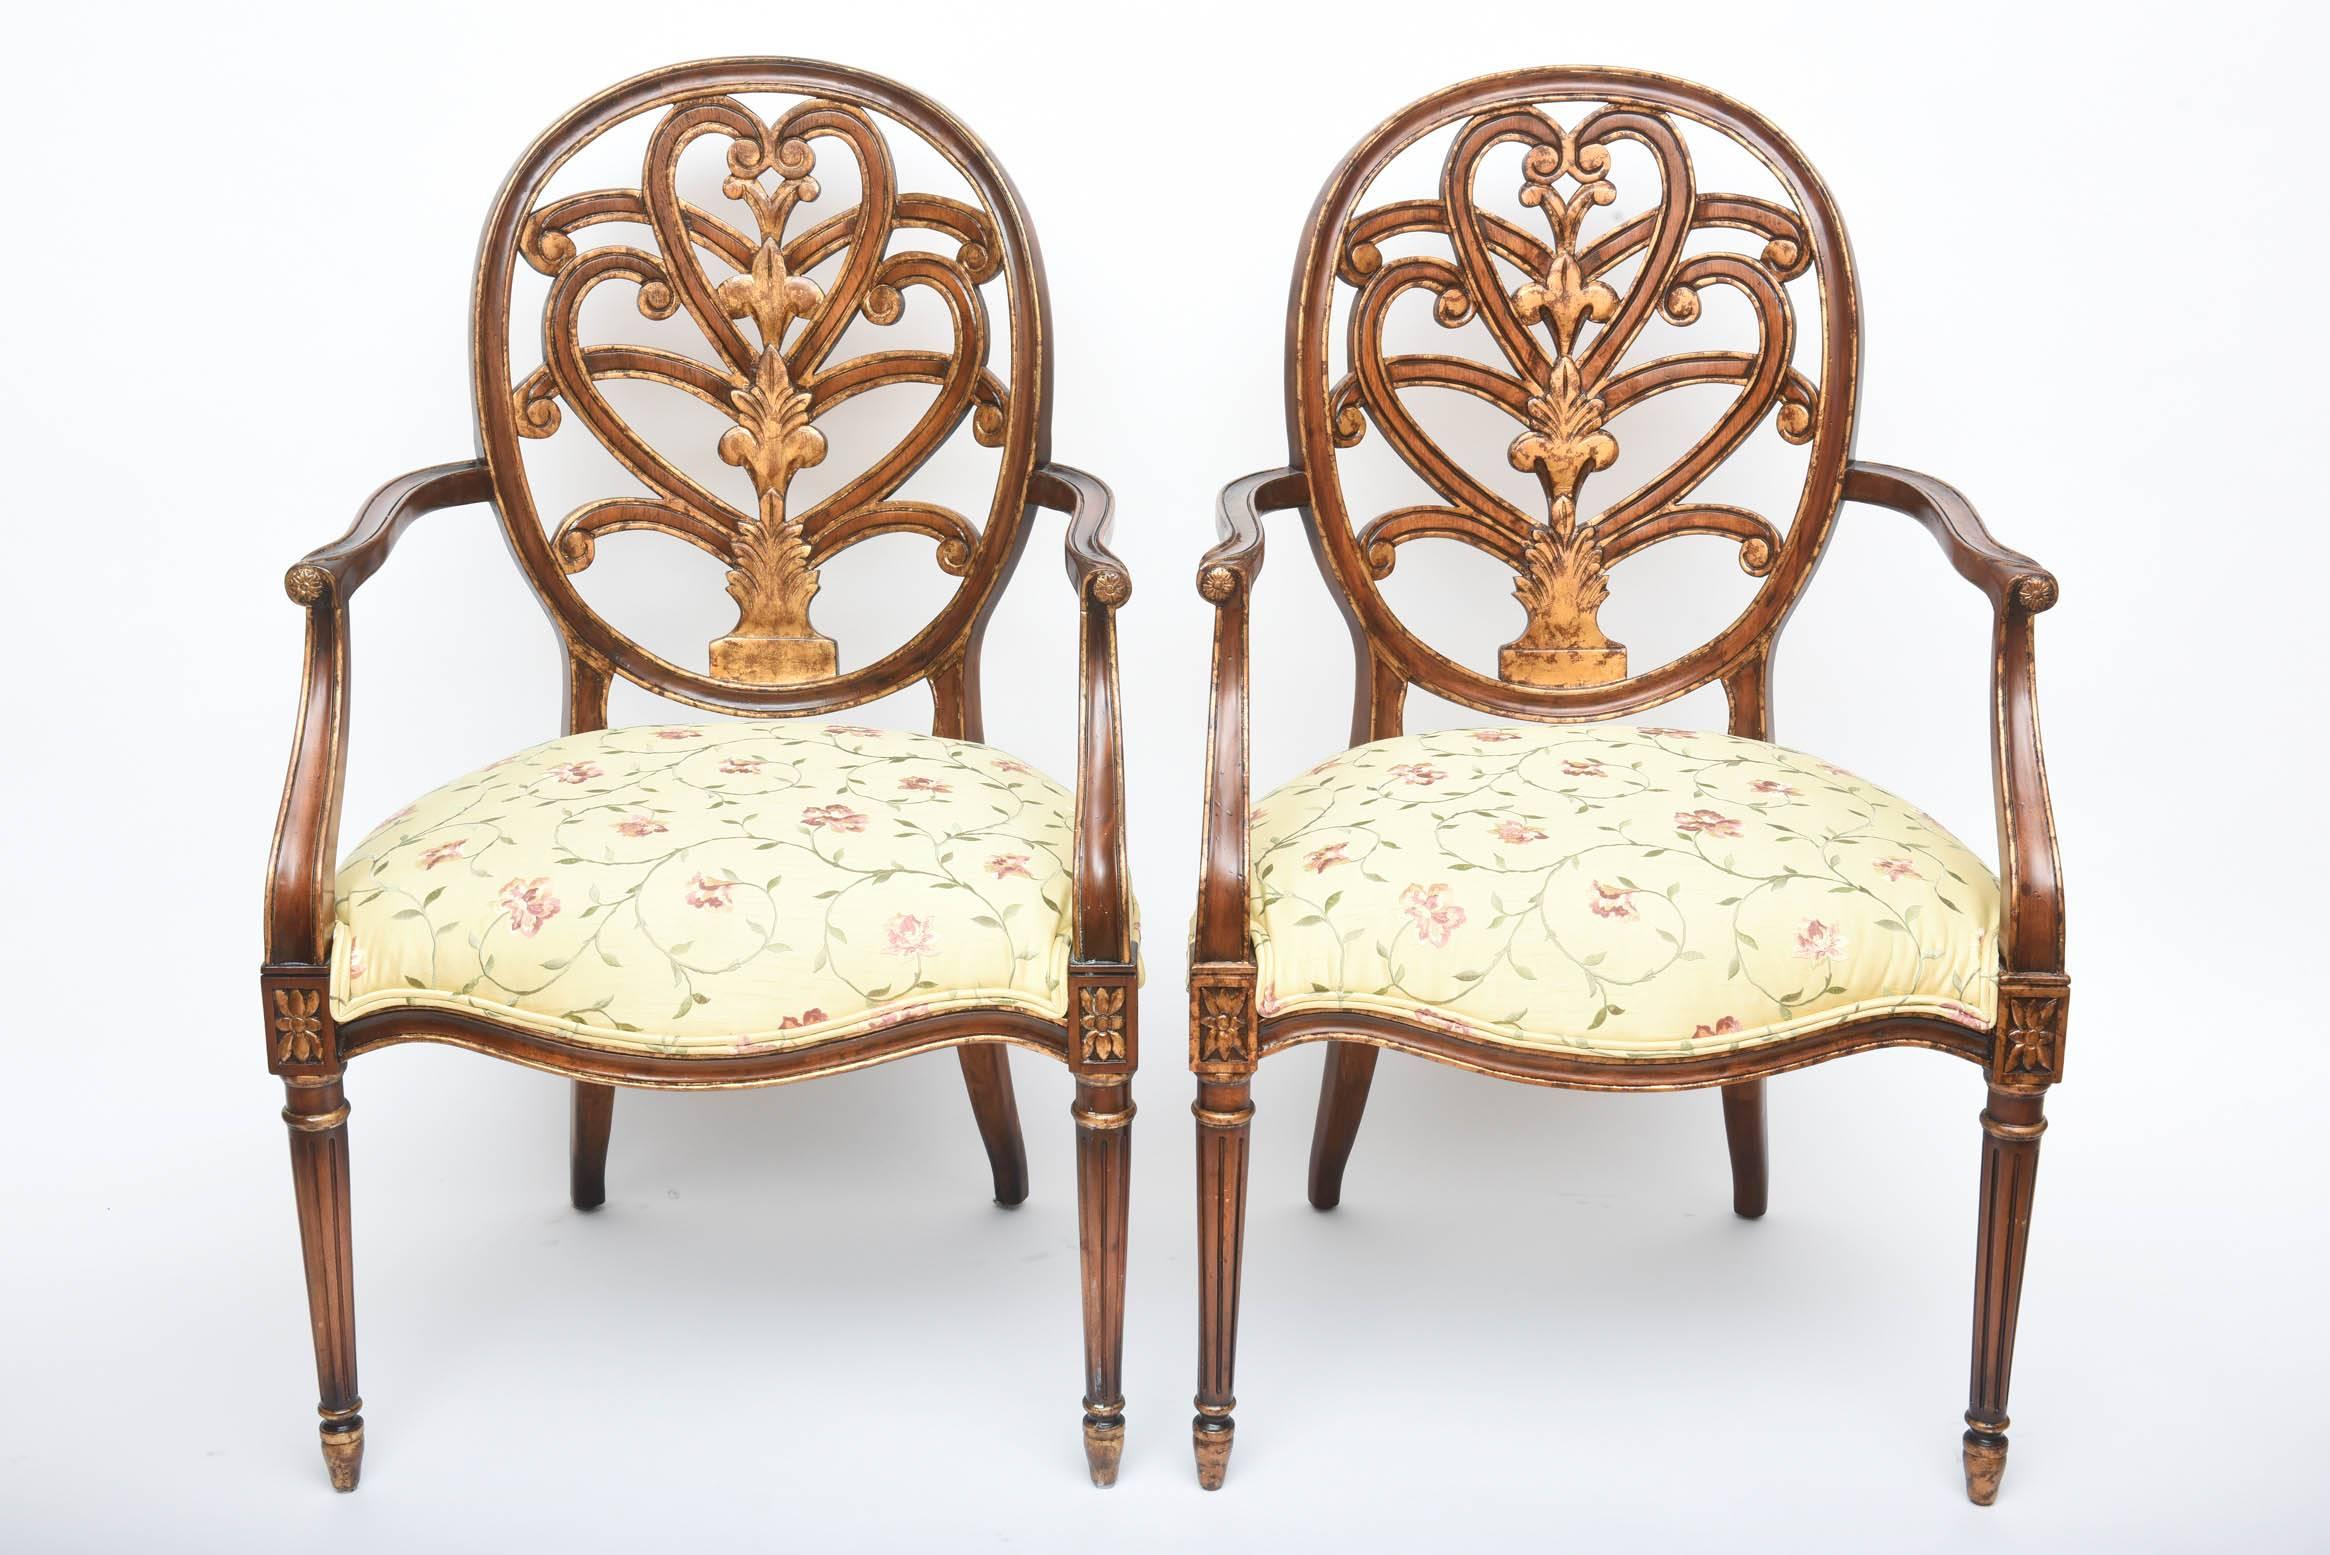 A great pair of armchairs that have been recently upholstered in a yellow ground floral needlepoint design. Very nice antique condition and hopefully the pictures will capture the grace and elegance in the design. The seat at its widest point